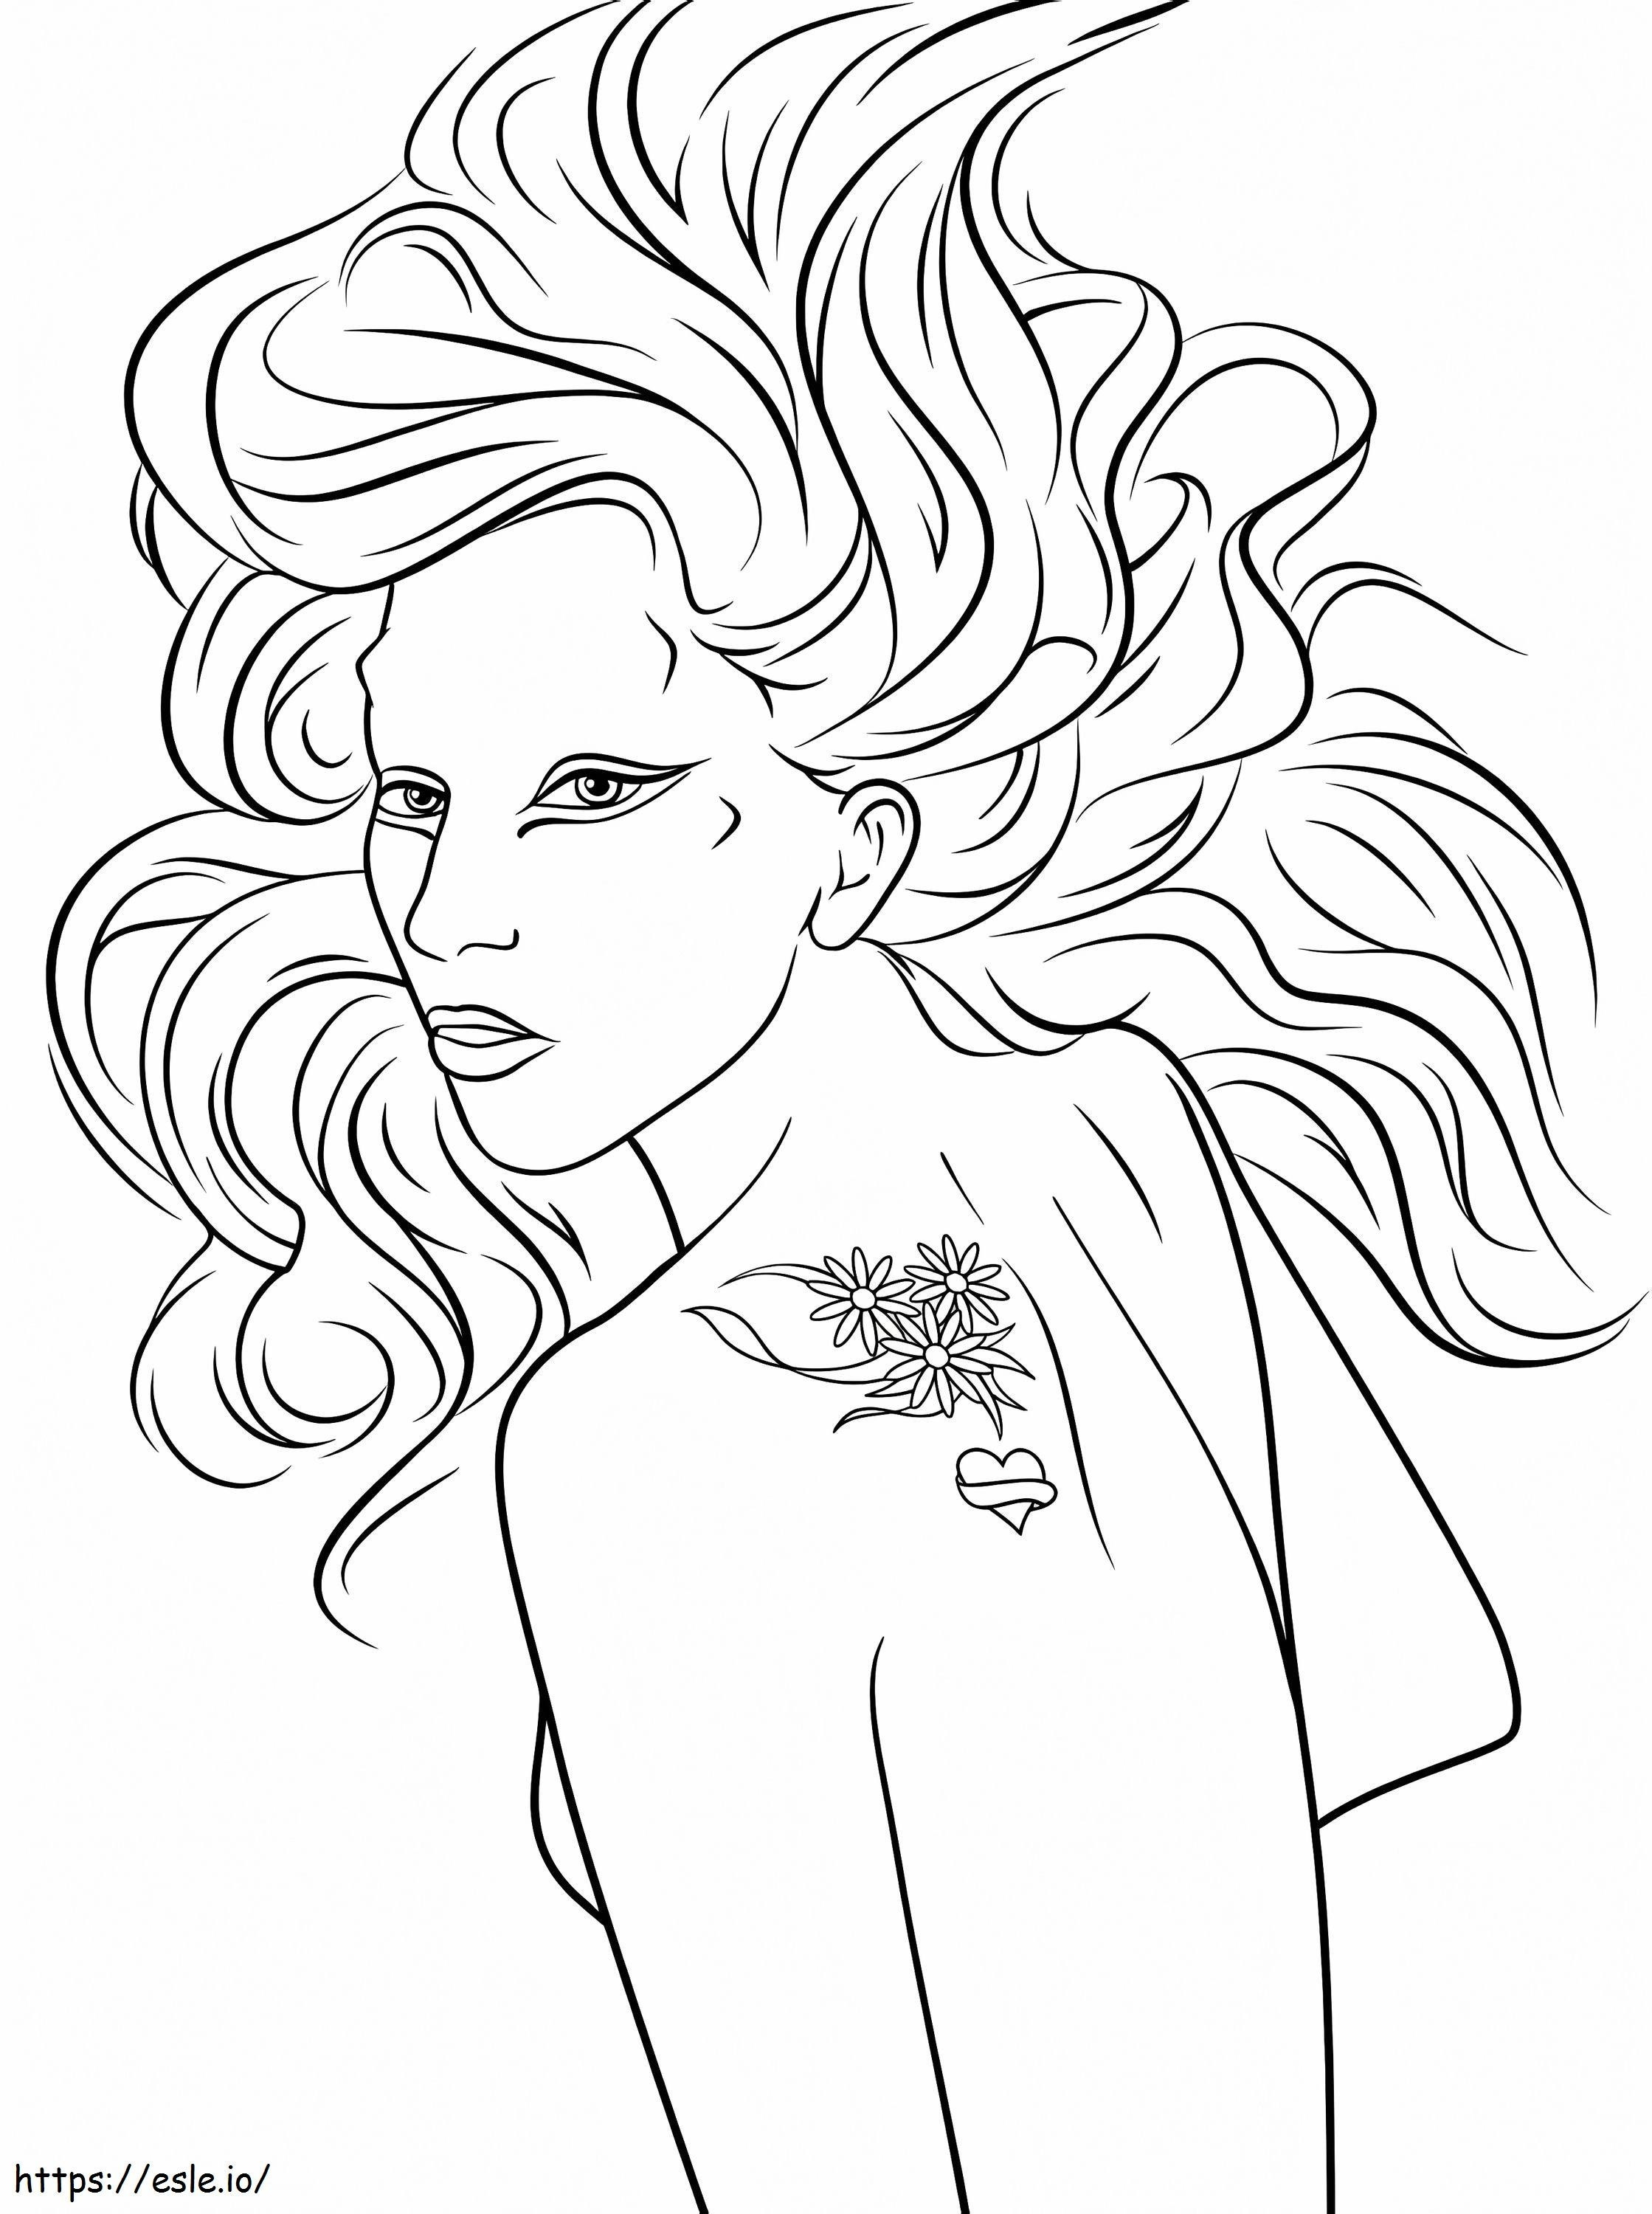 Awesome Lady Gaga coloring page